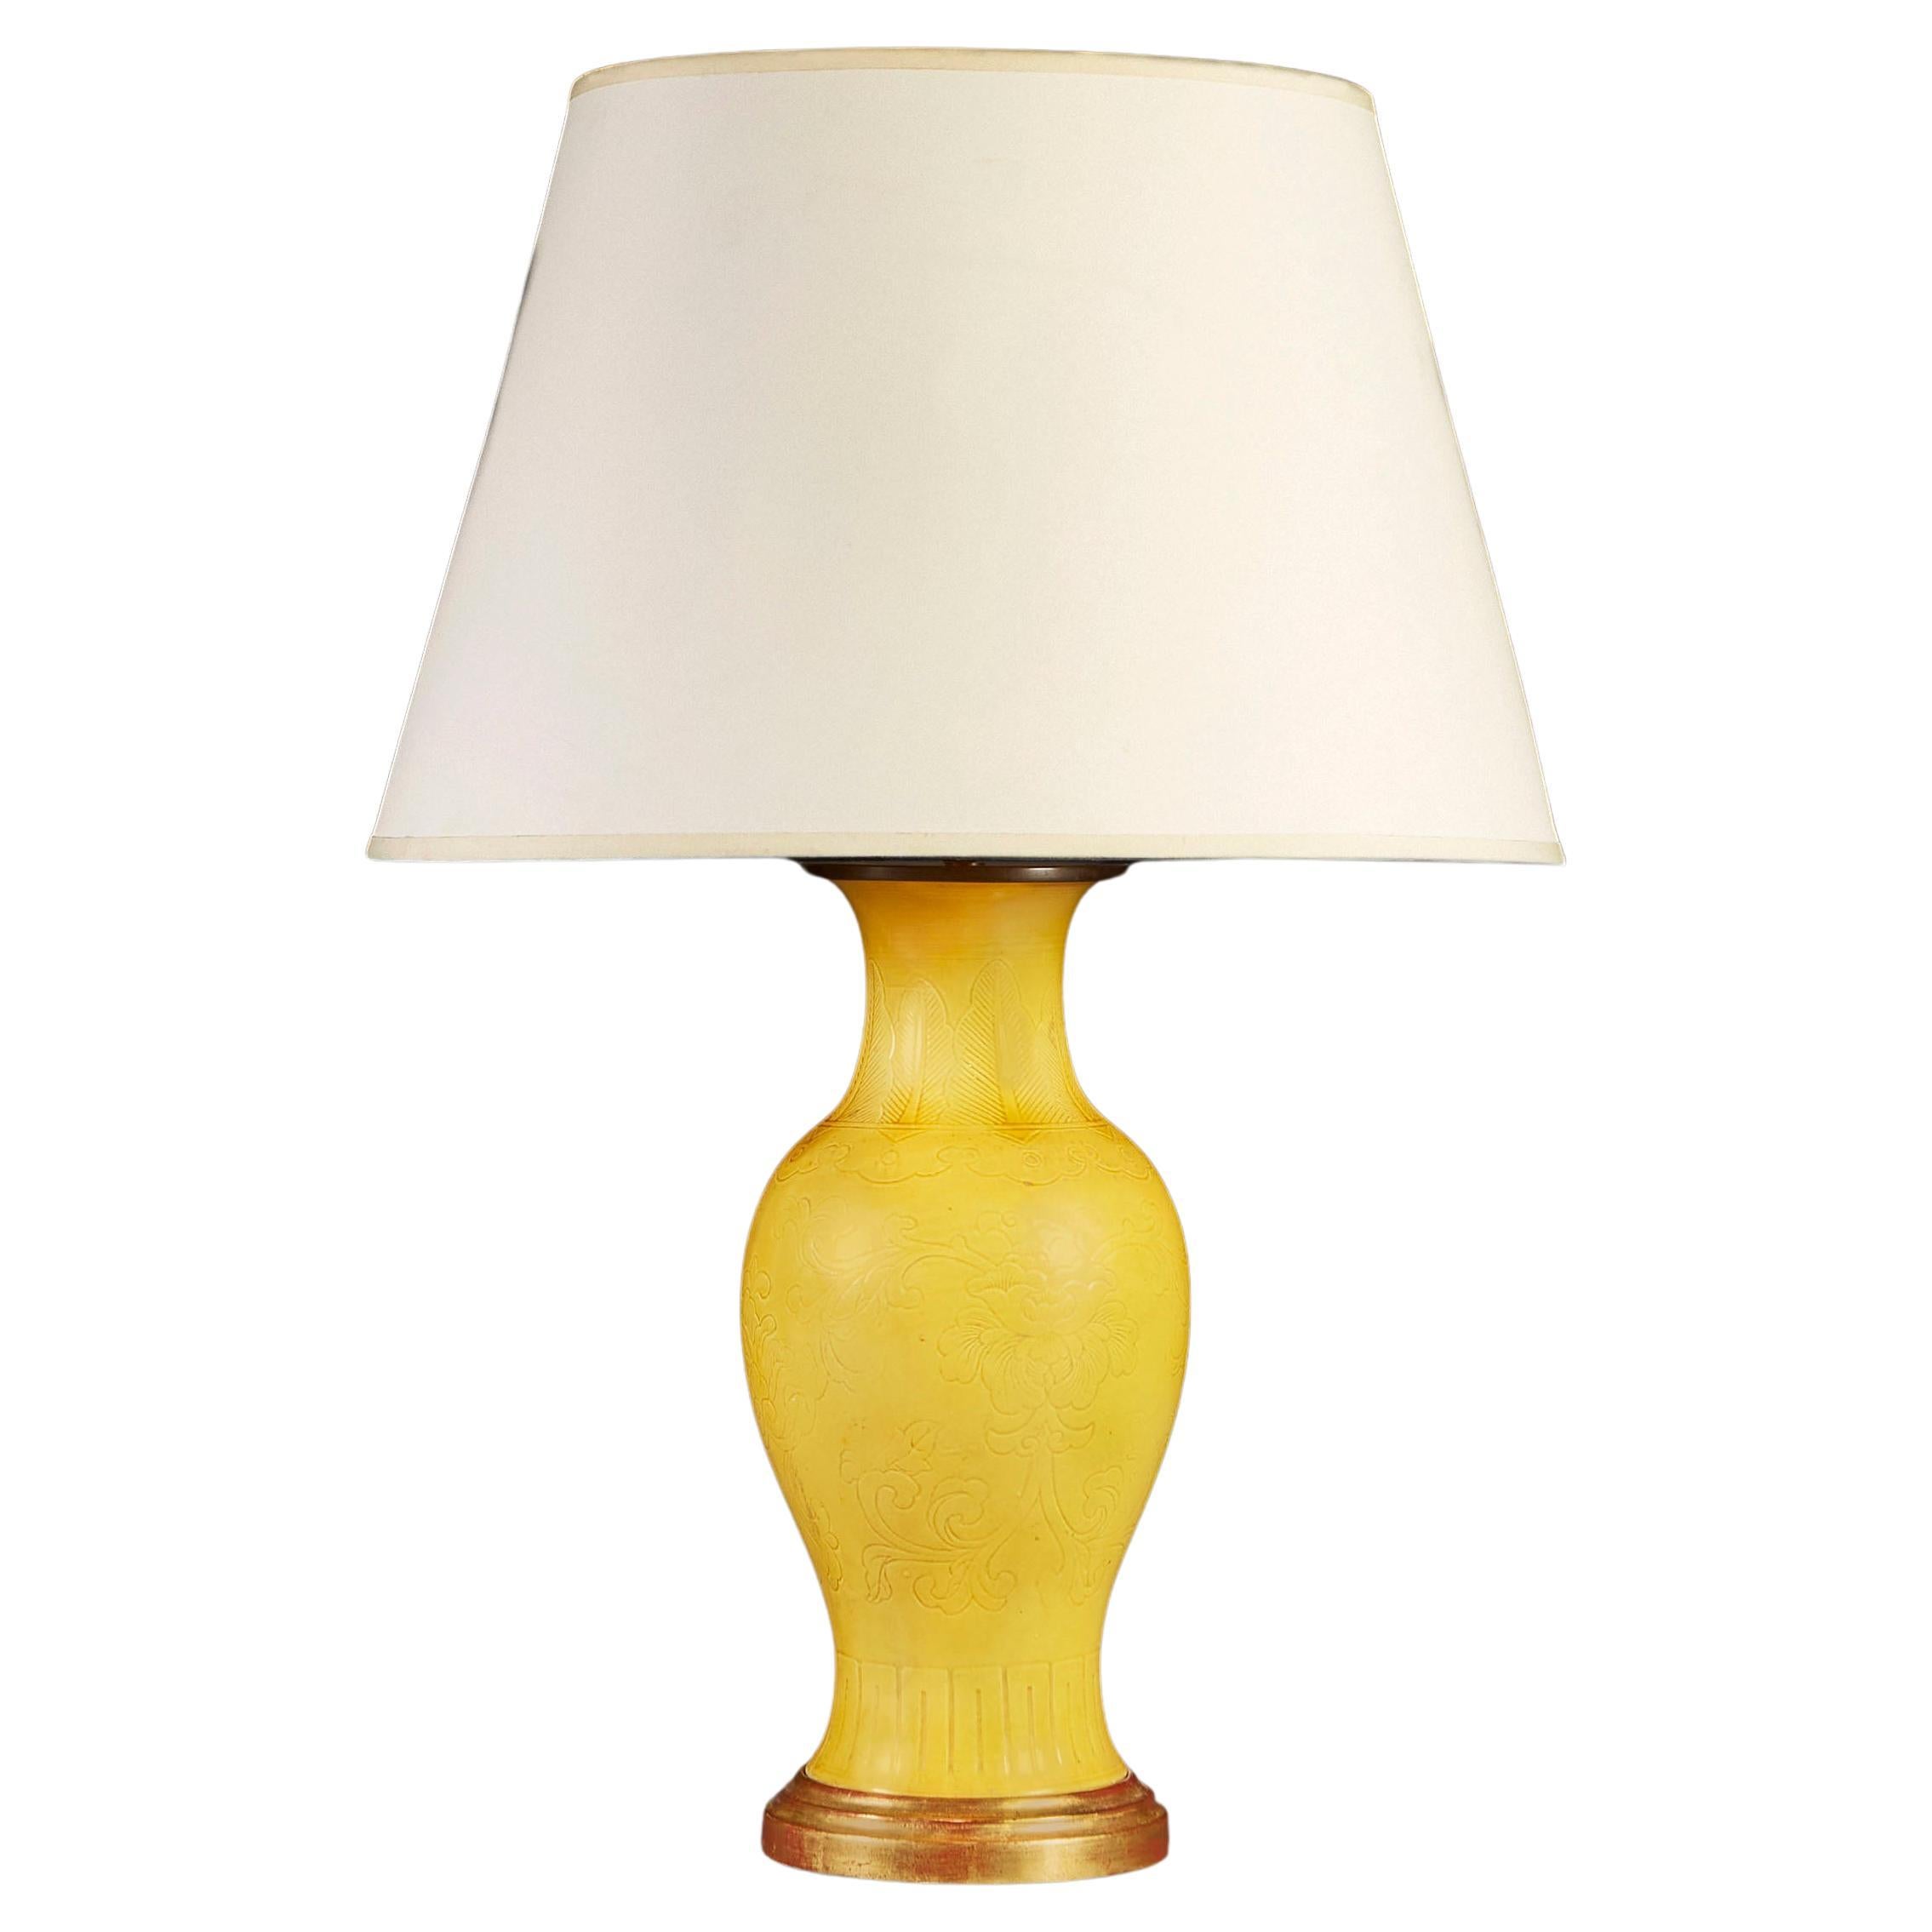 19th Century Chinese Yellow Vase as a Table Lamp with Giltwood Base